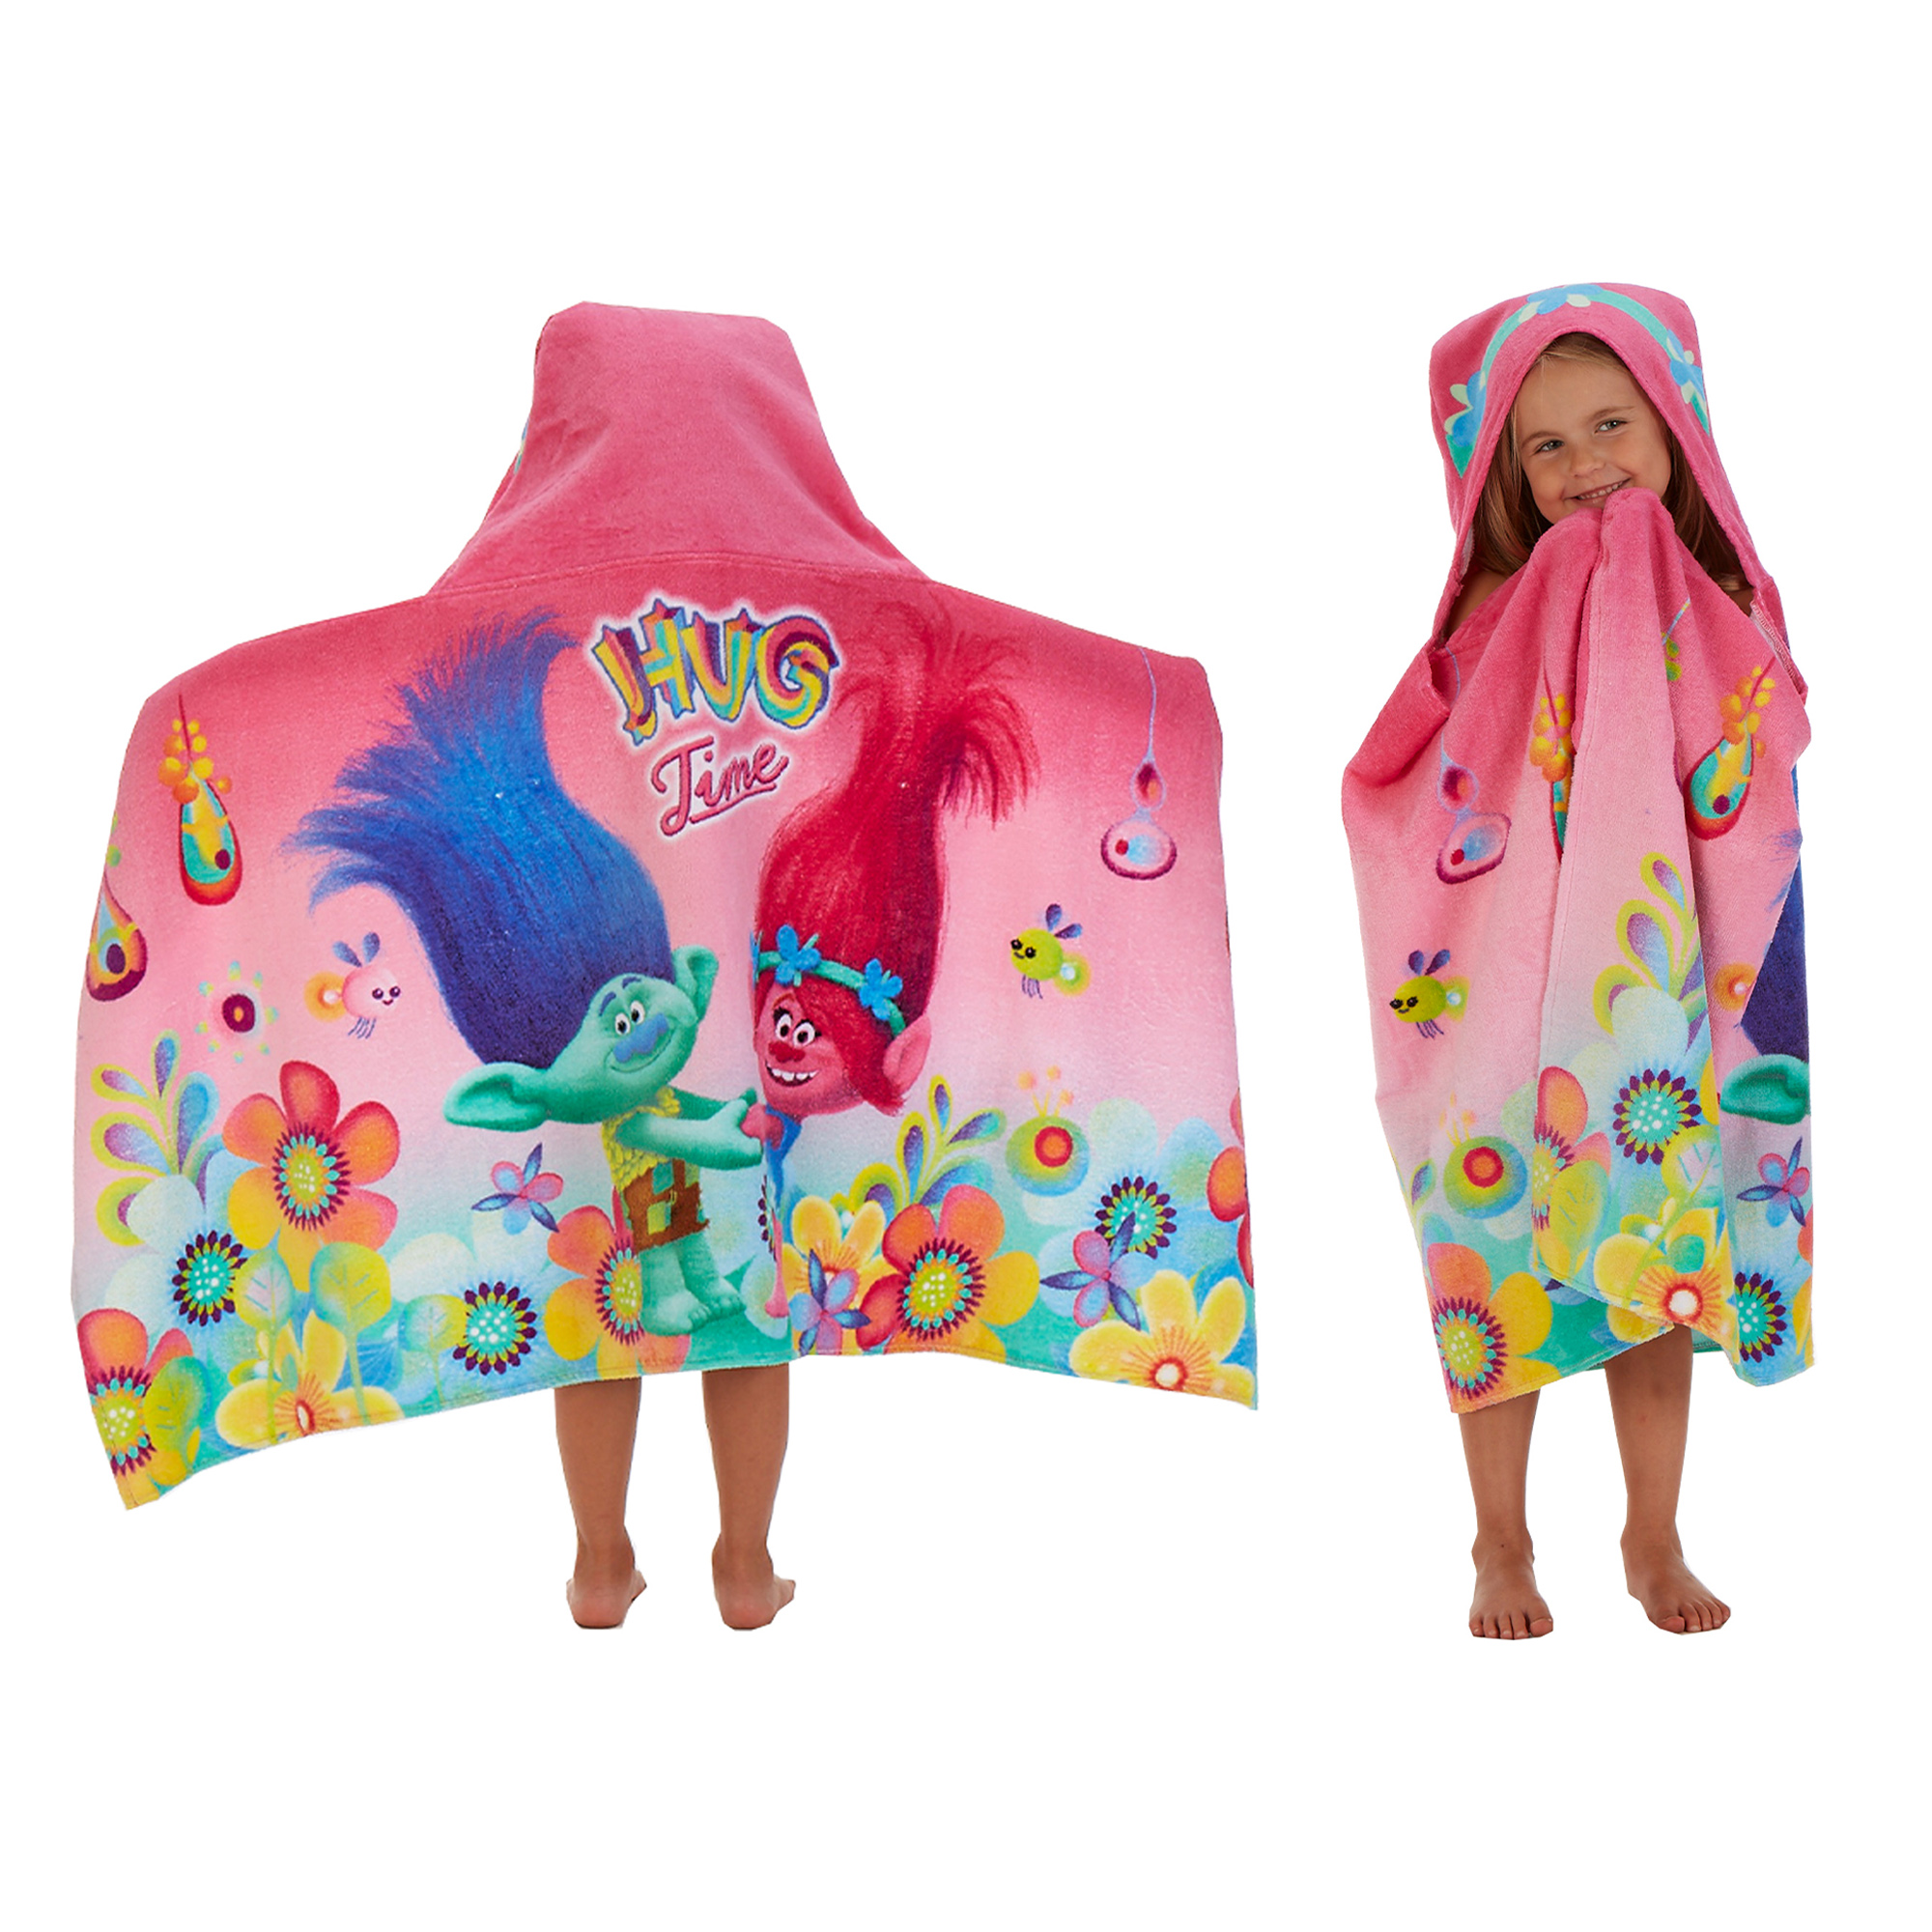 Trolls Kids Bath and Beach Hooded Towel Wrap, 100% Cotton, Pink - image 1 of 9